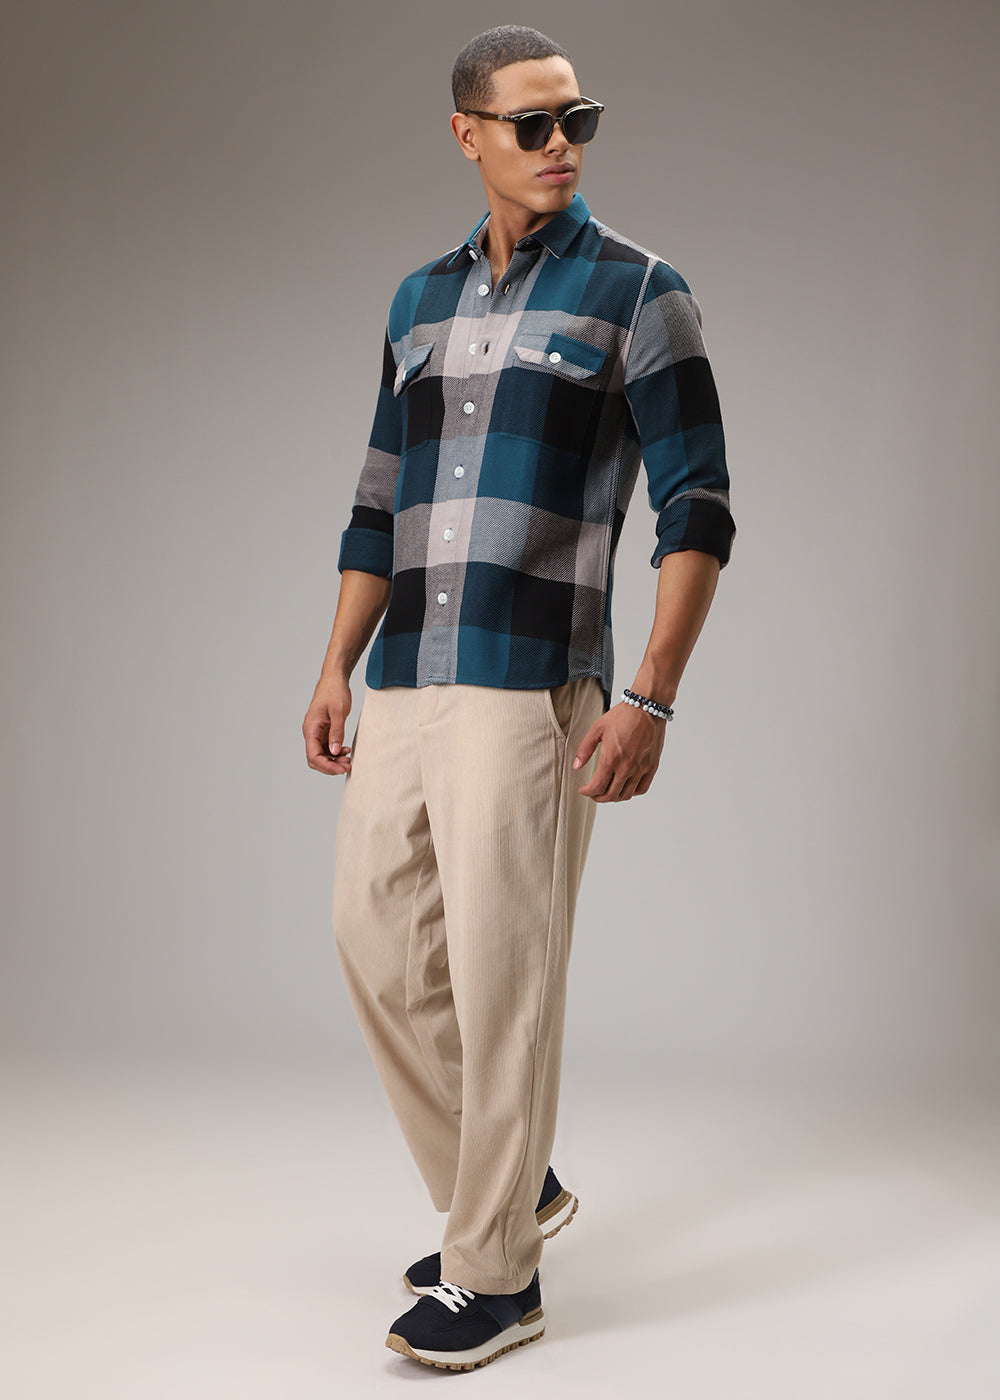 Teal Blue Brushed Cotton Check Shirt